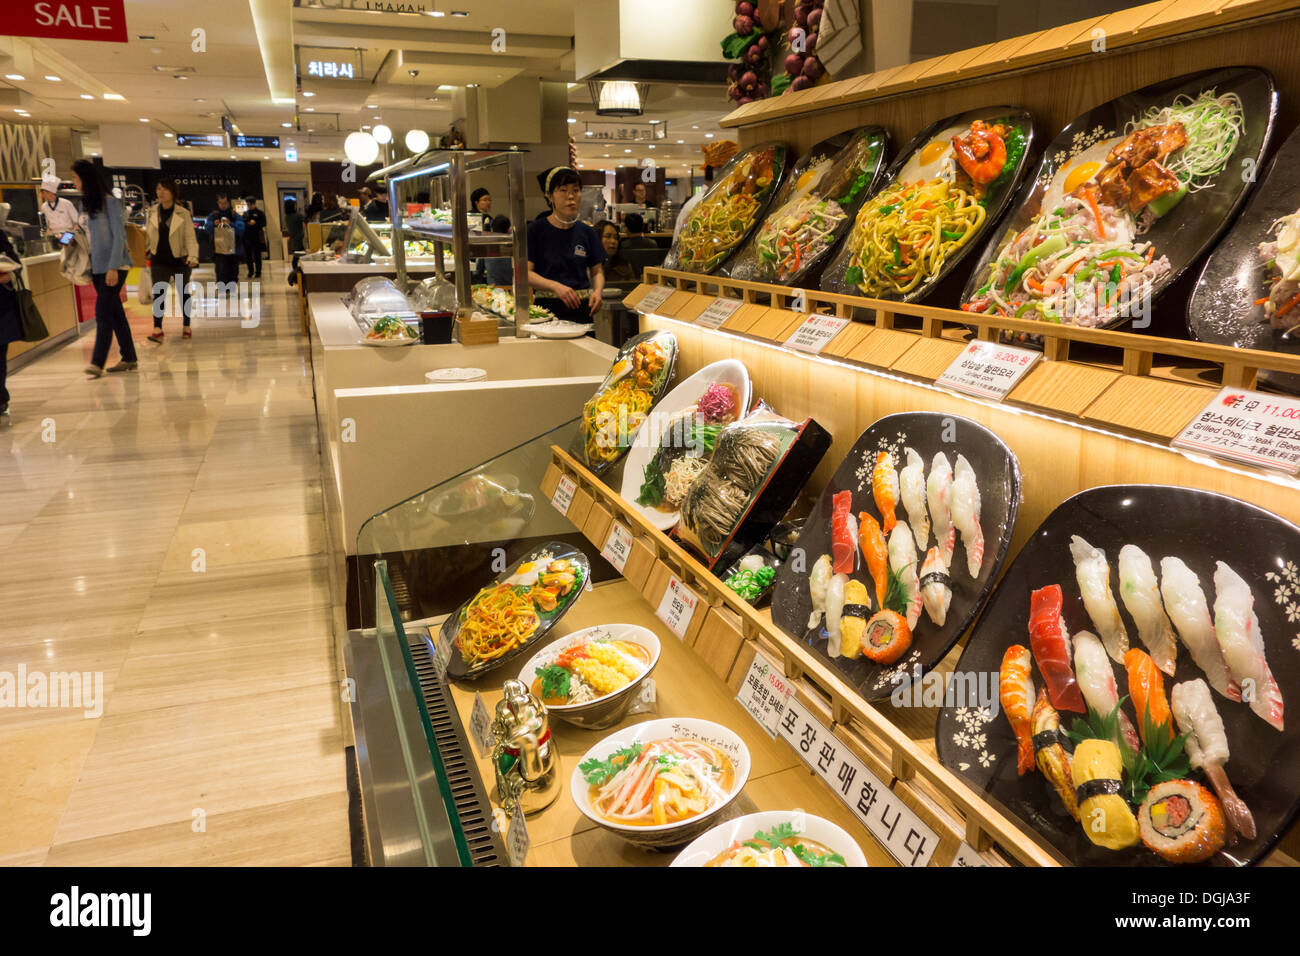 Display of sample dishes made from wax of restaurant in food court, Seoul, Korea Stock Photo